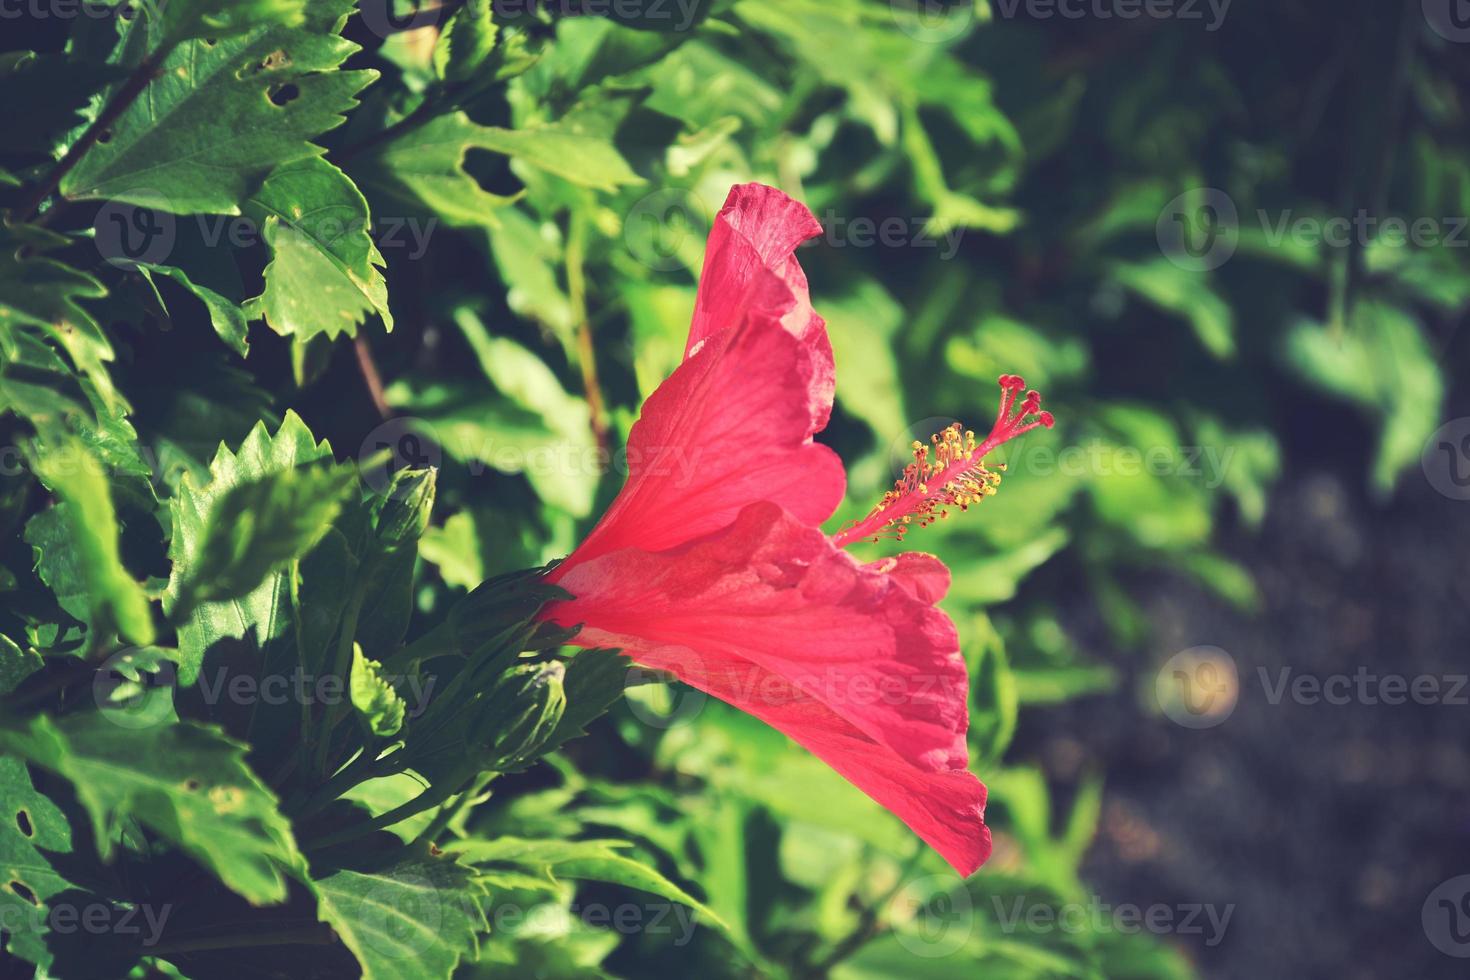 blooming hibiscus flower growing in the garden among green leaves in a natural habitat photo